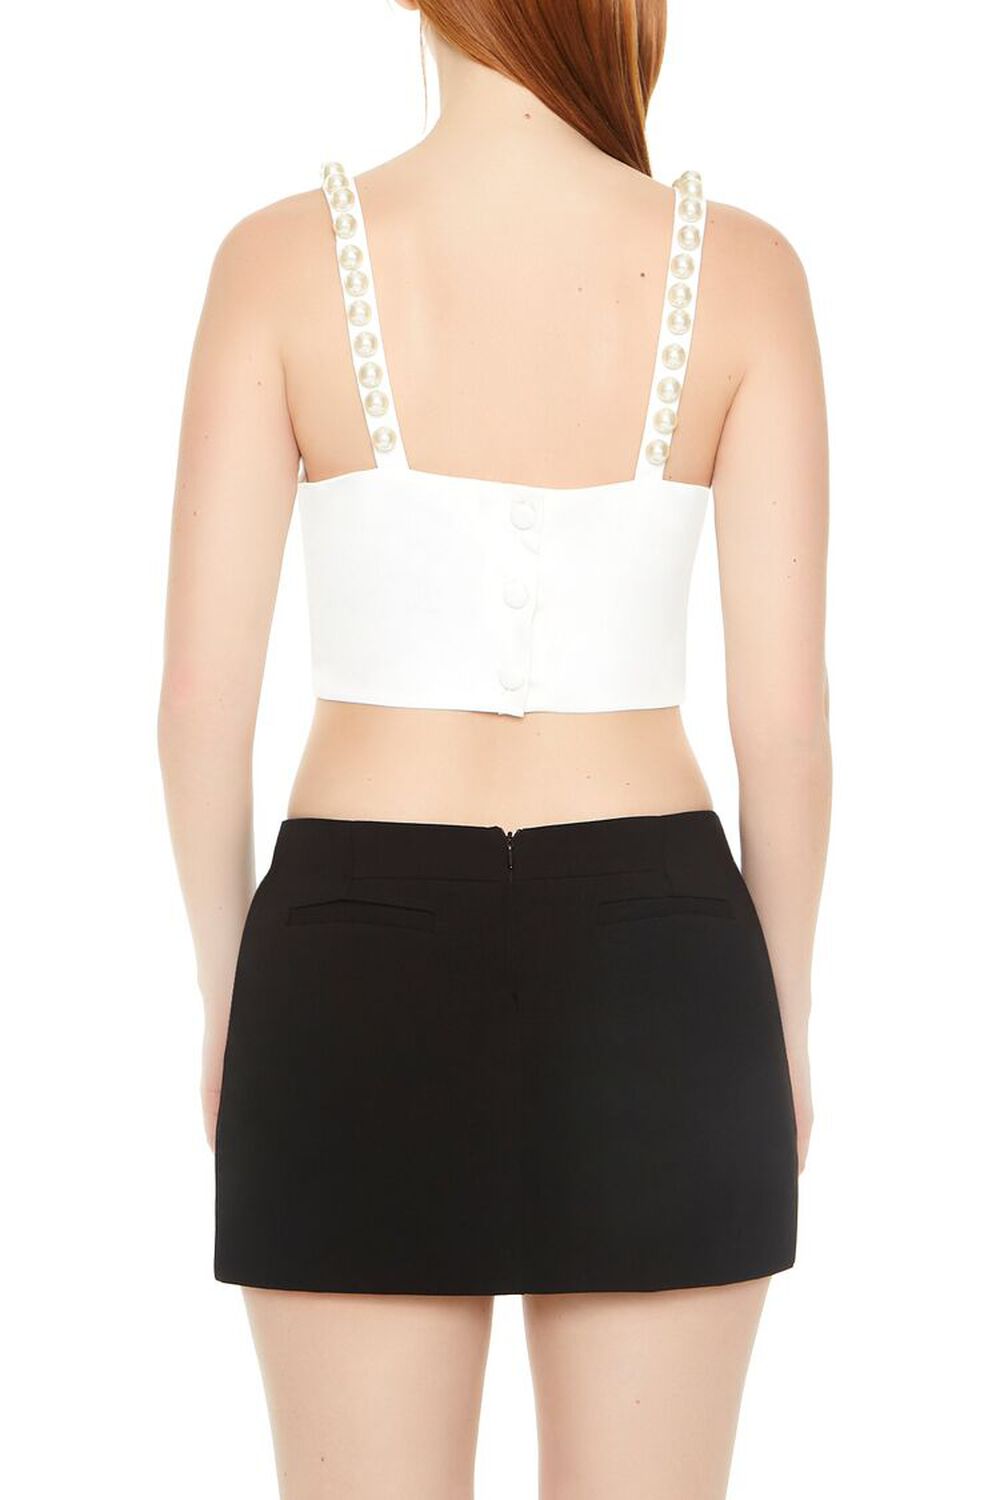 WHITE/WHITE Faux Pearl Crop Top, image 3